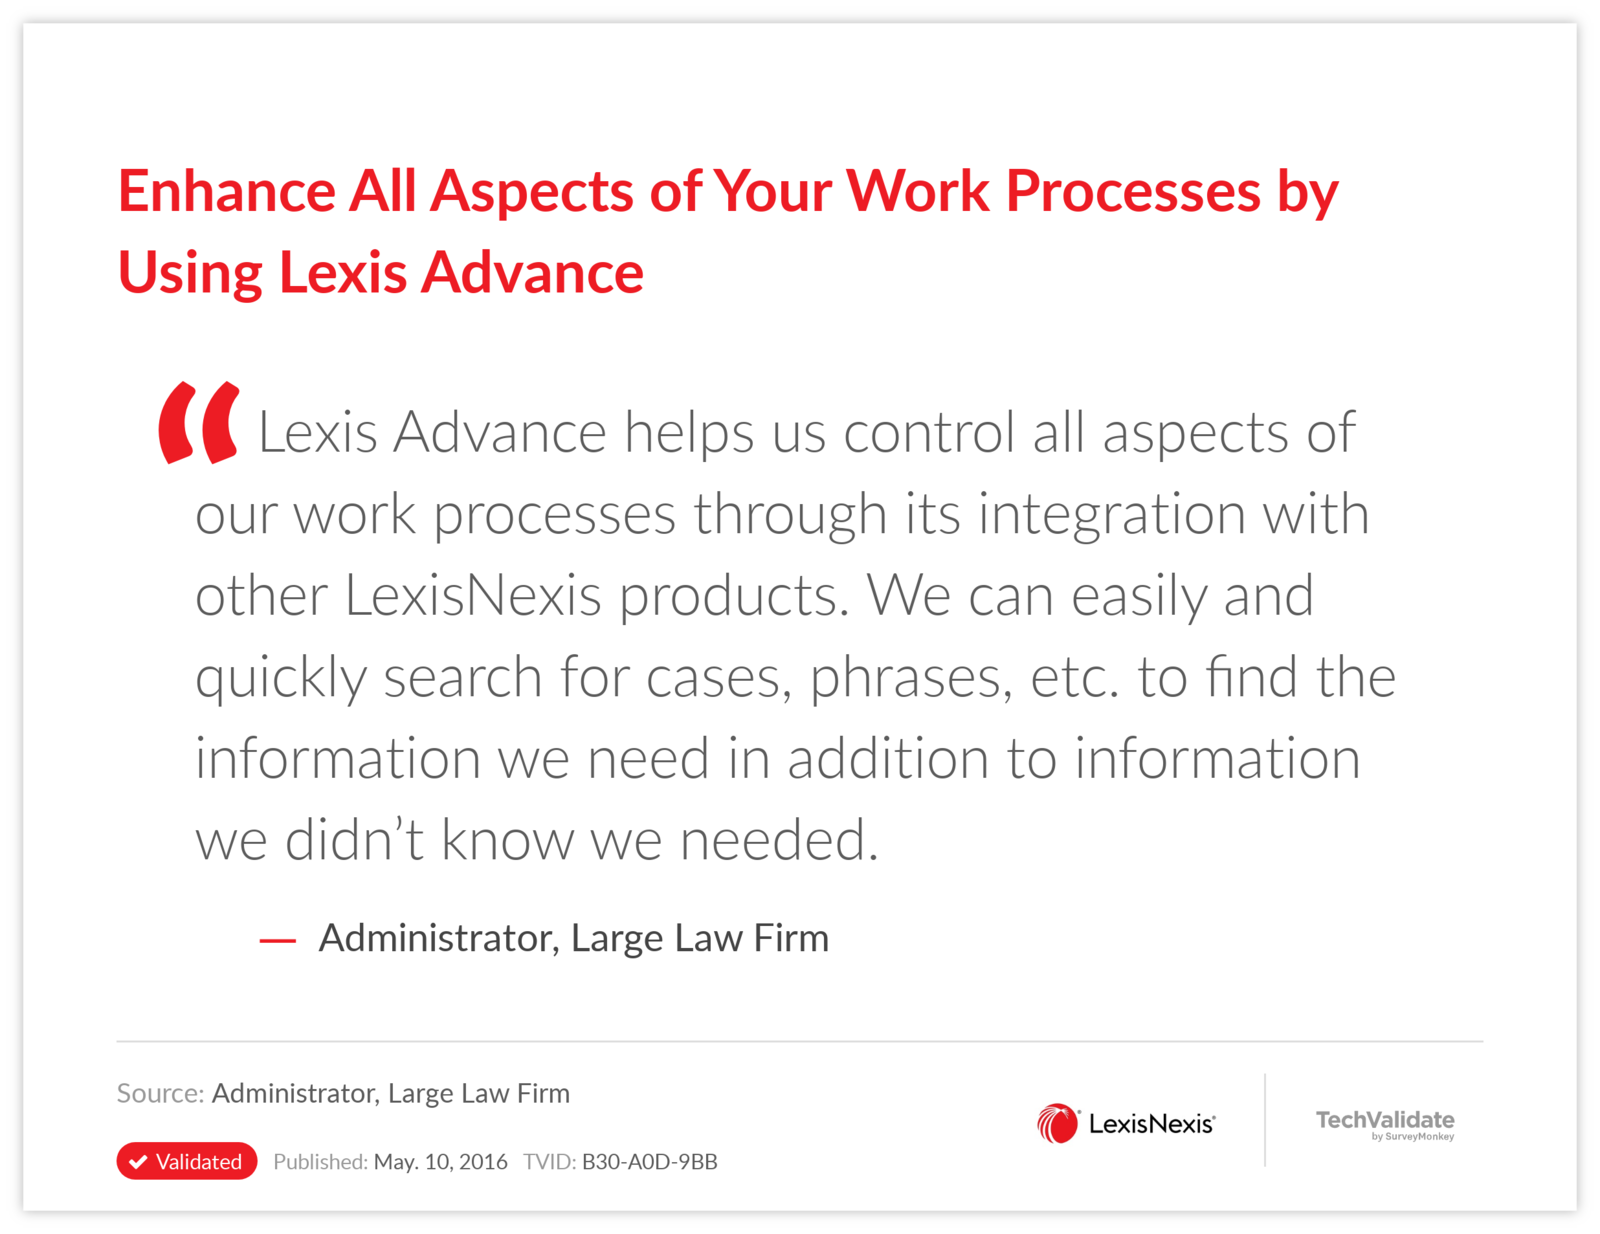 Enhance All Aspects of Your Work Processes by Using Lexis Advance